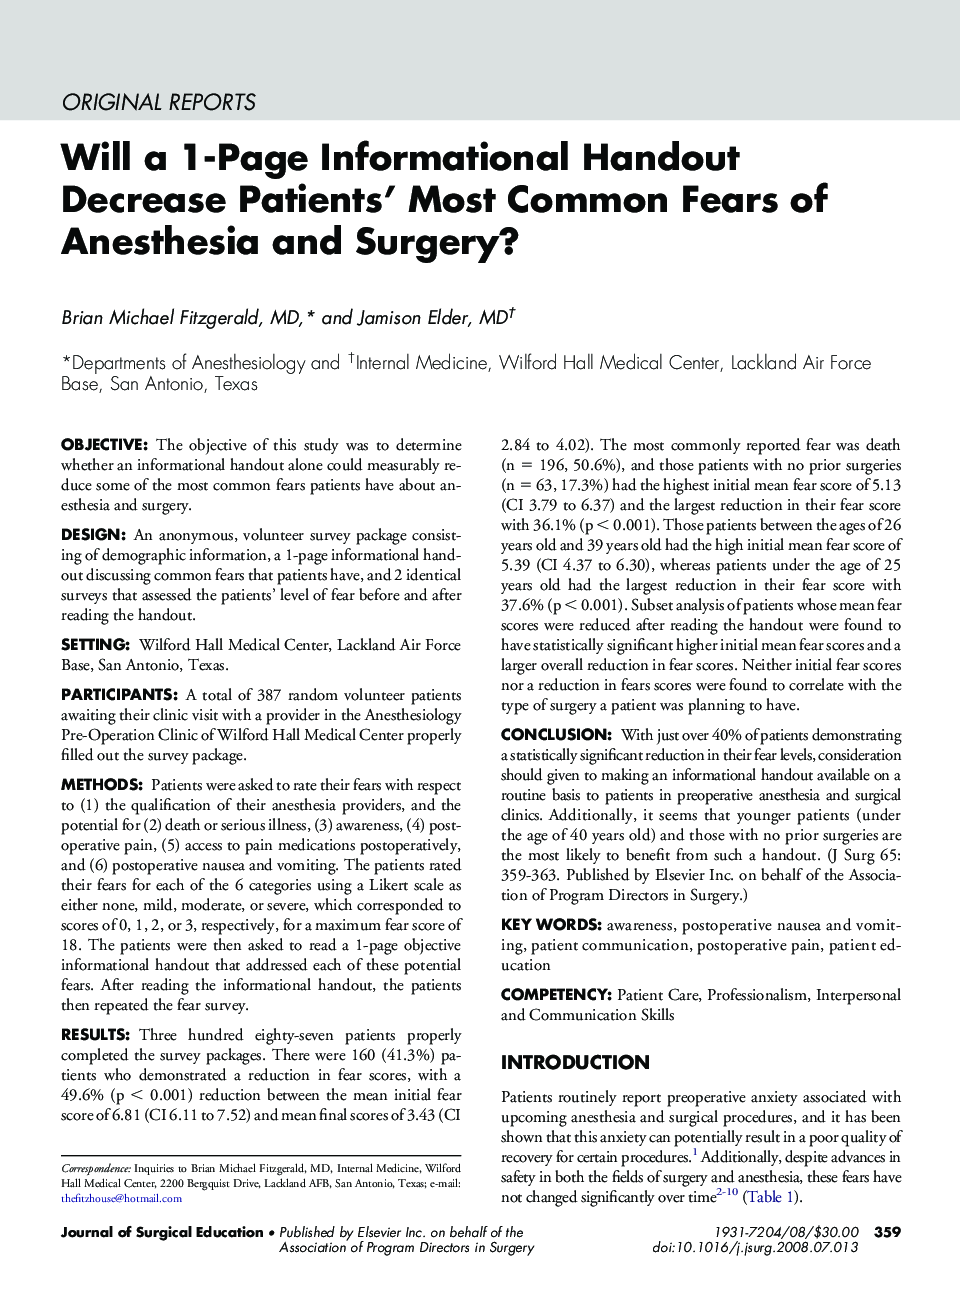 Will a 1-Page Informational Handout Decrease Patients' Most Common Fears of Anesthesia and Surgery?